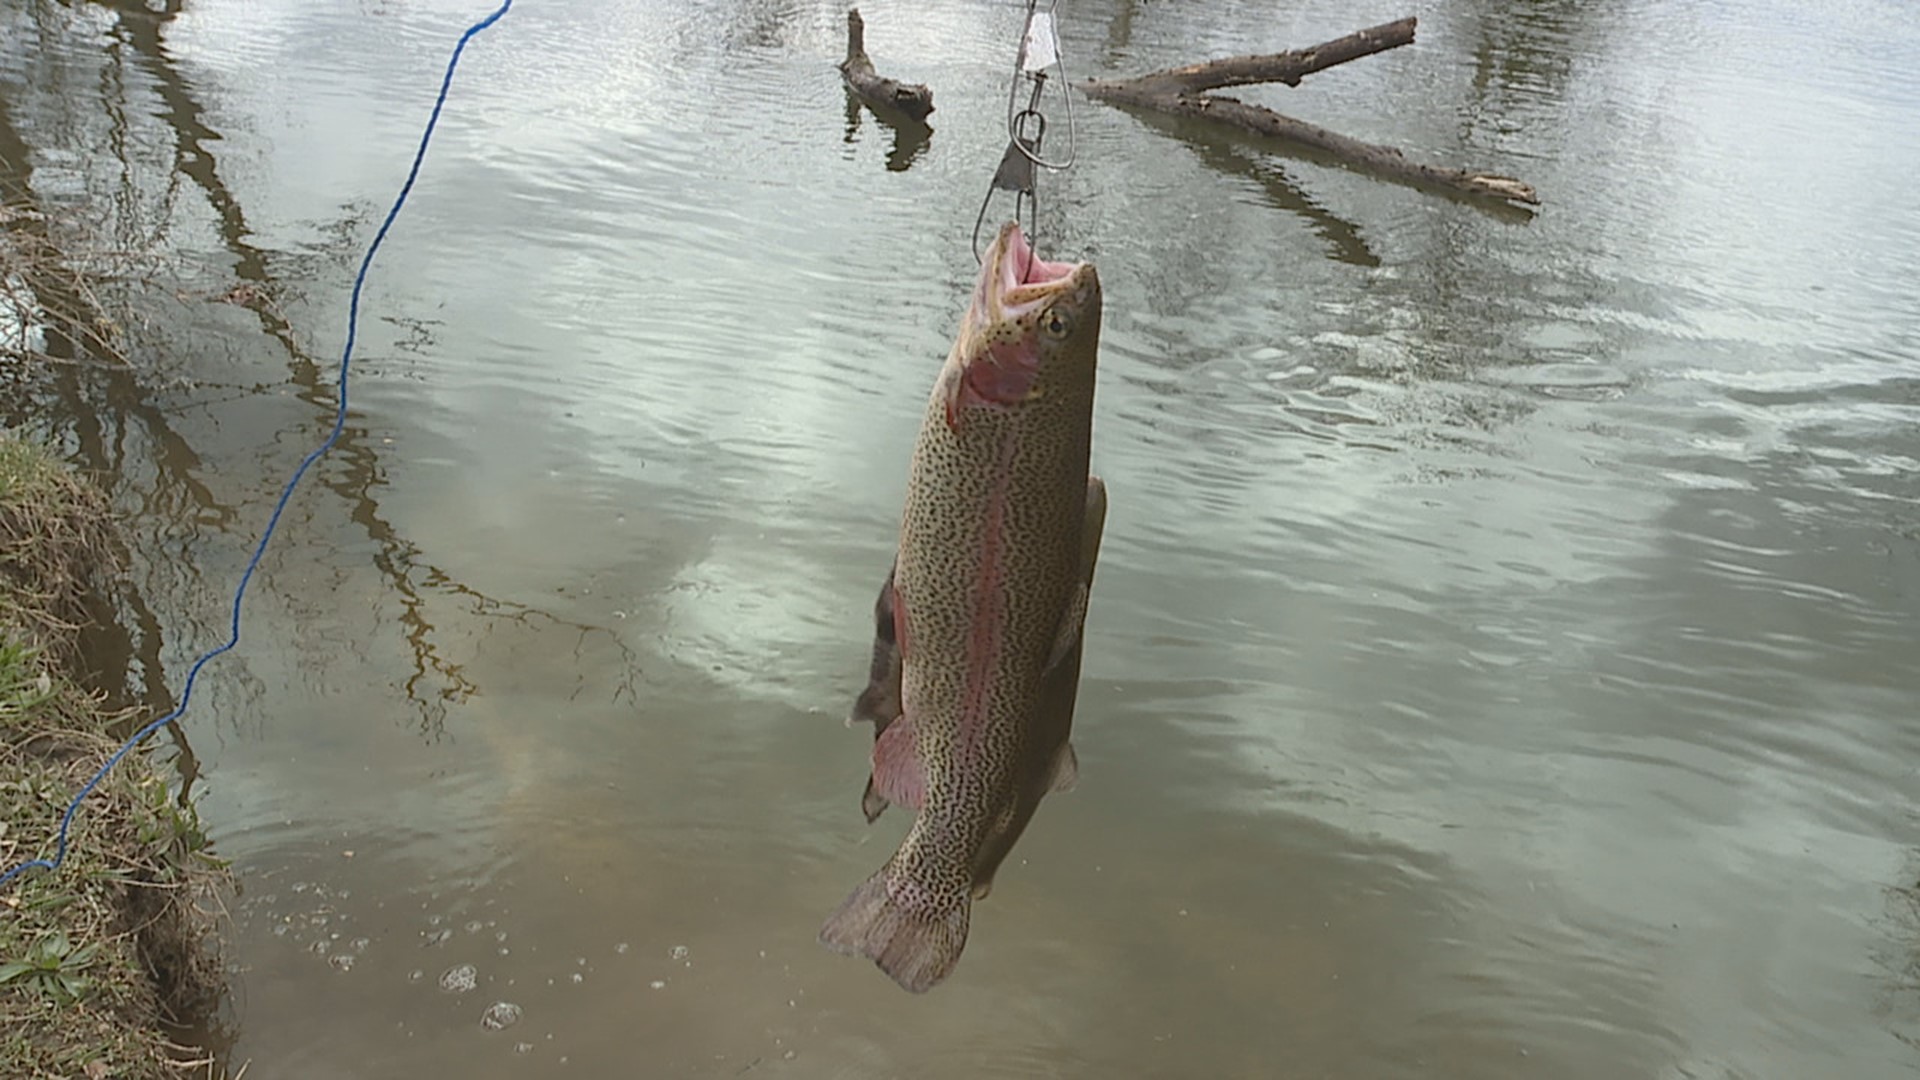 Trout season kicked off across Pennsylvania Saturday with many anglers coming out to take advantage of the freshly stocked game.